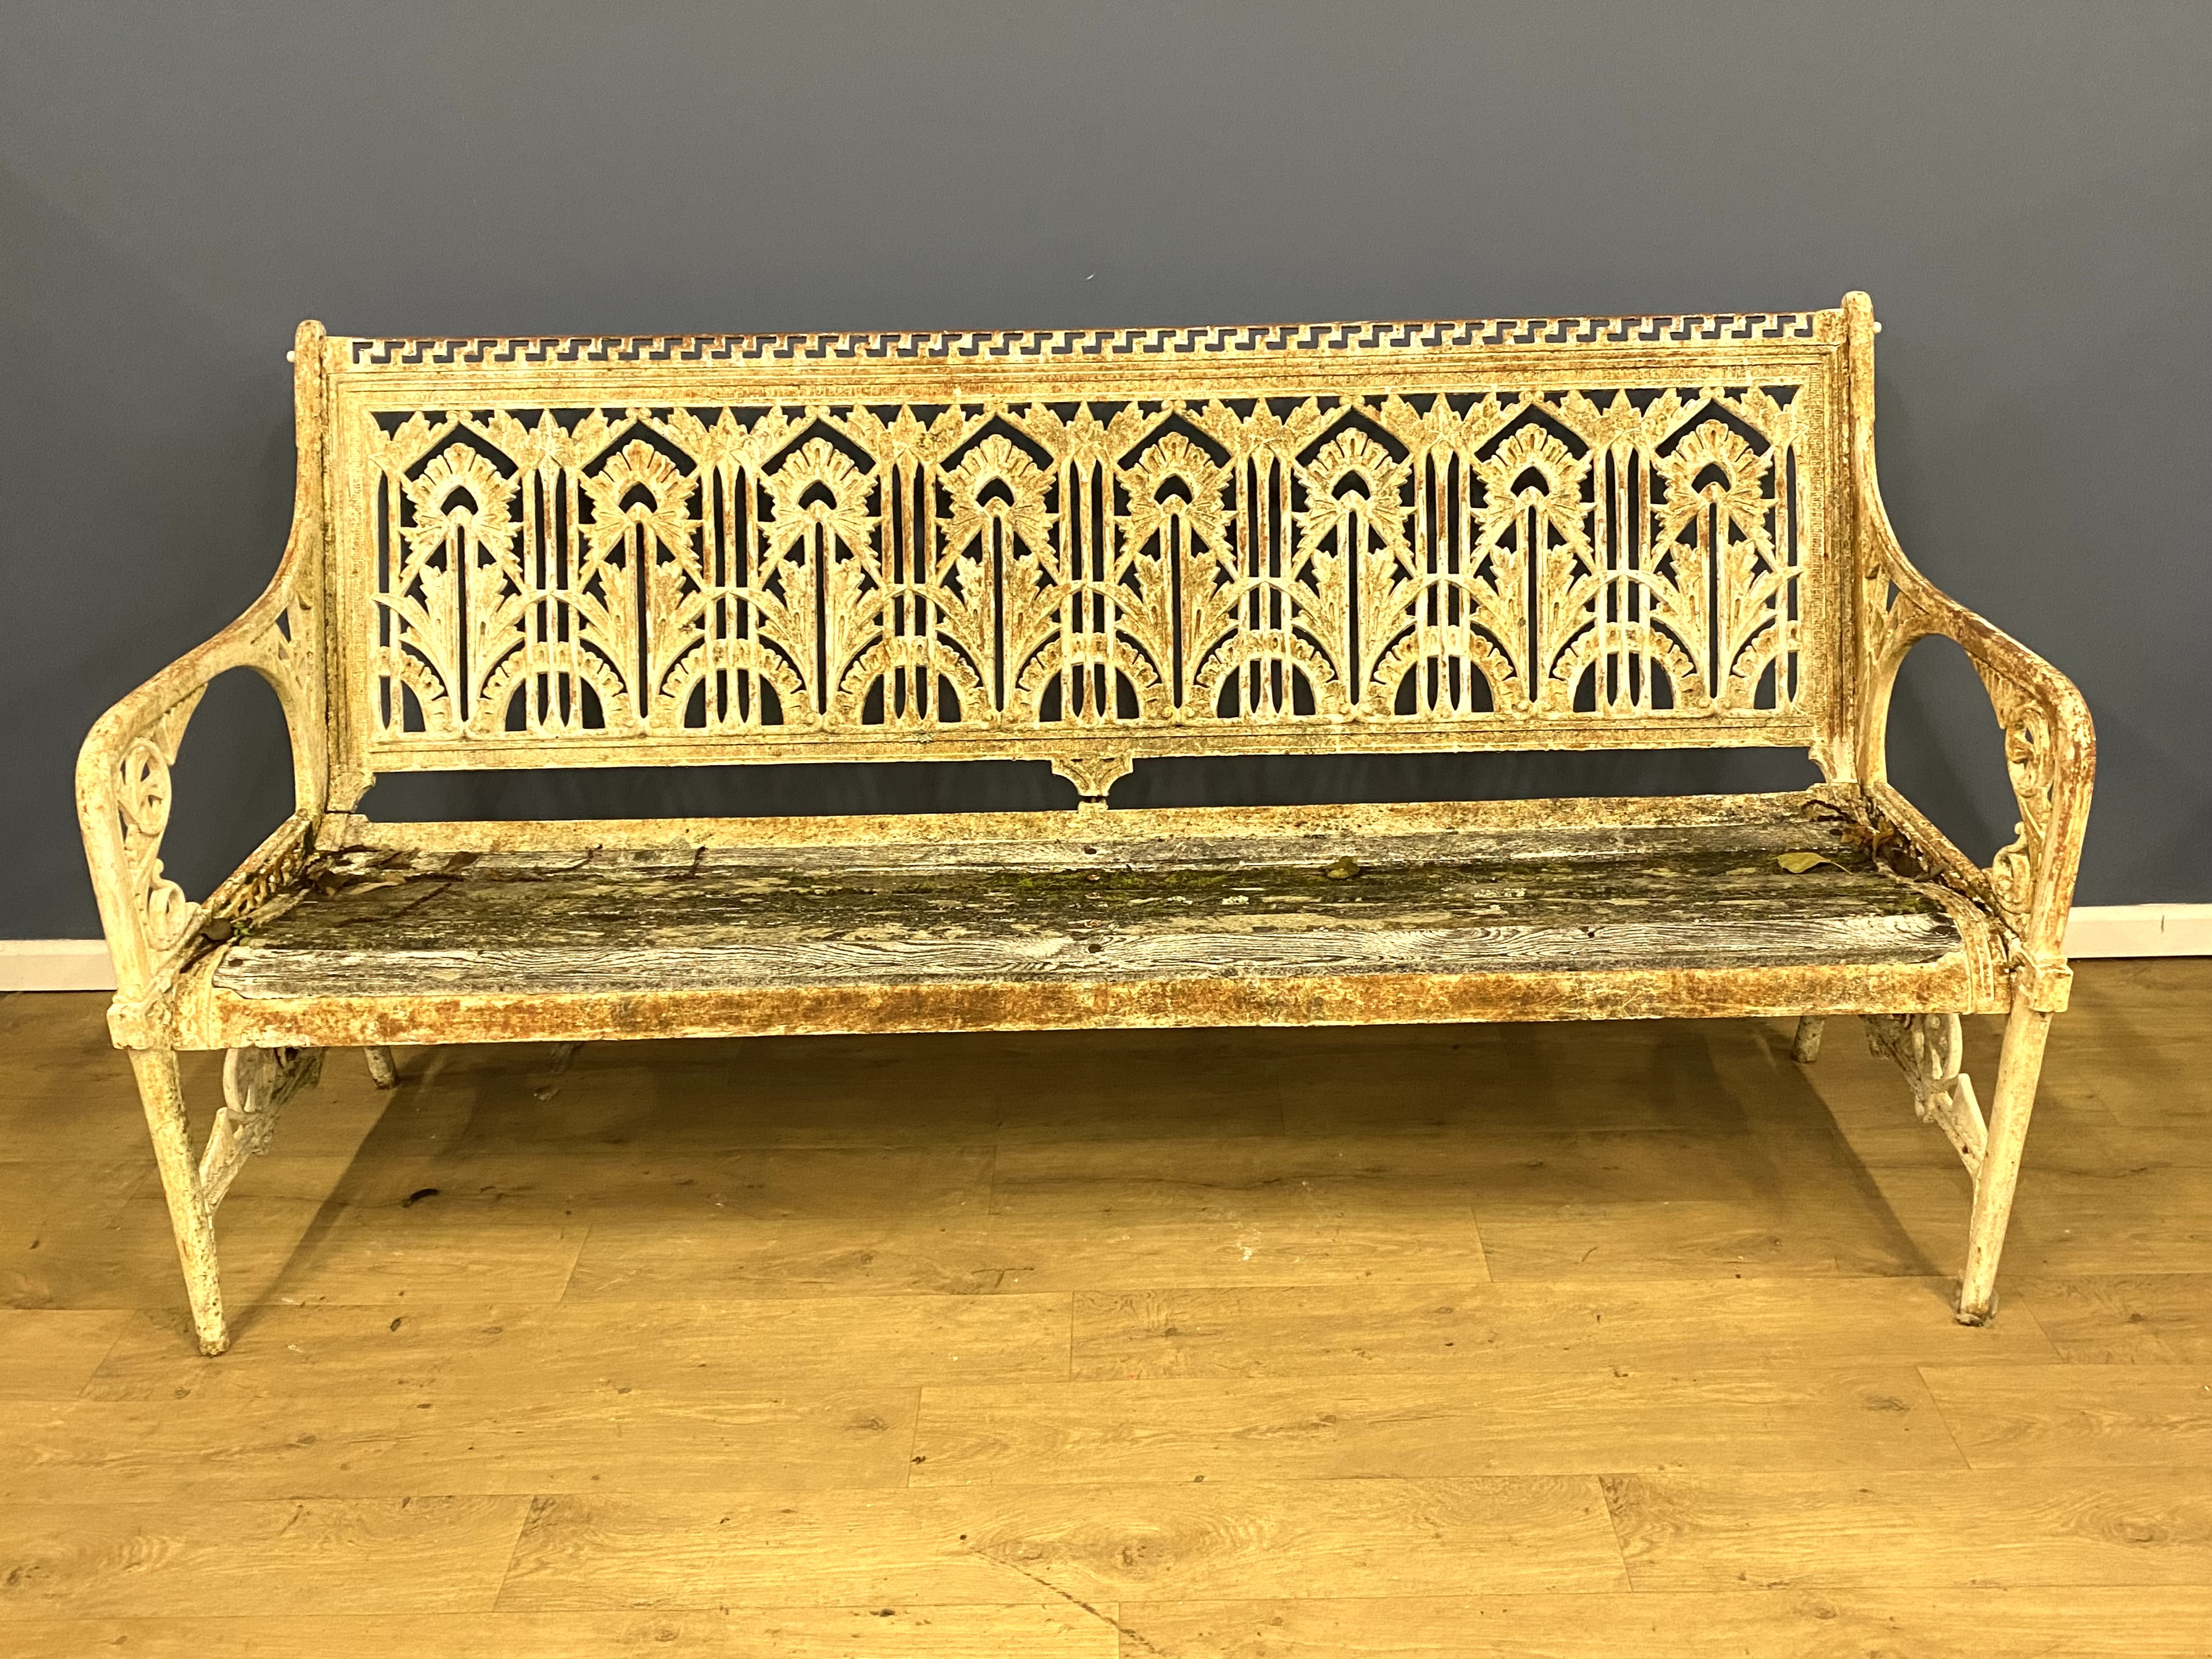 Cast iron Coalbrookdale style garden bench. From the Estate of Dame Mary Quant - Image 2 of 6